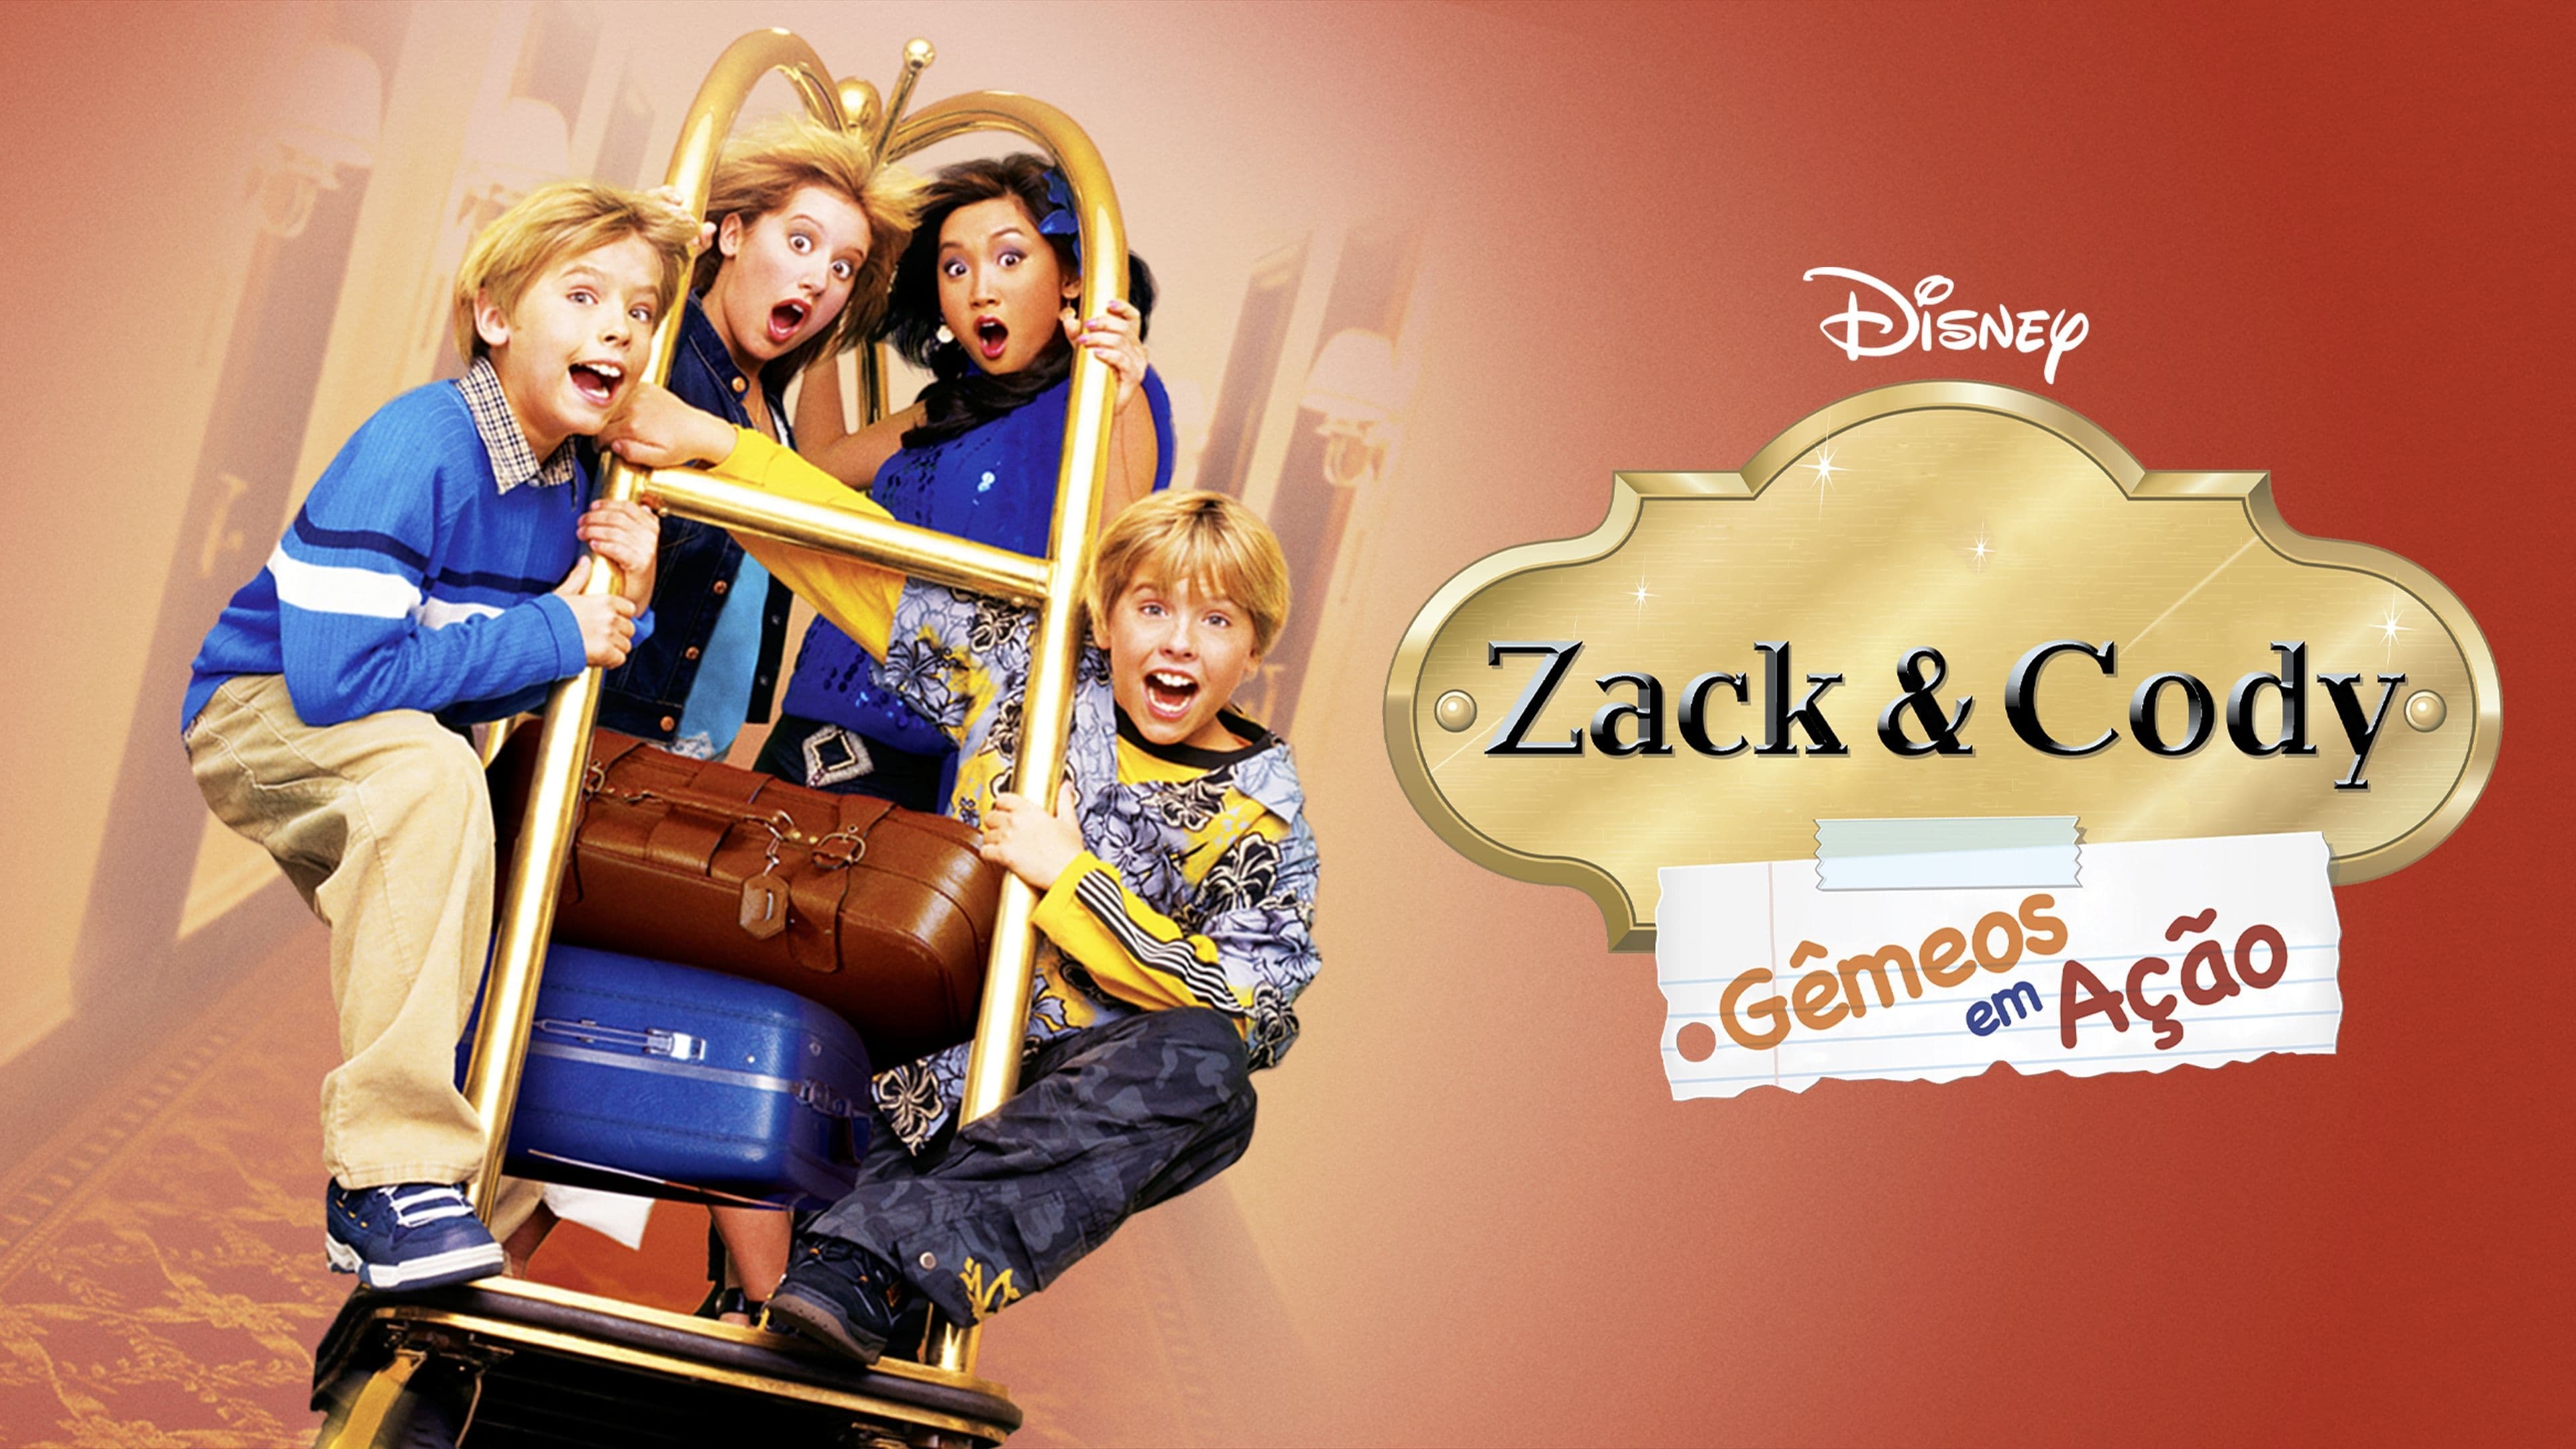 Suite Life of Zack and Cody - Theme Song Disney+ Throwbacks Disney+.